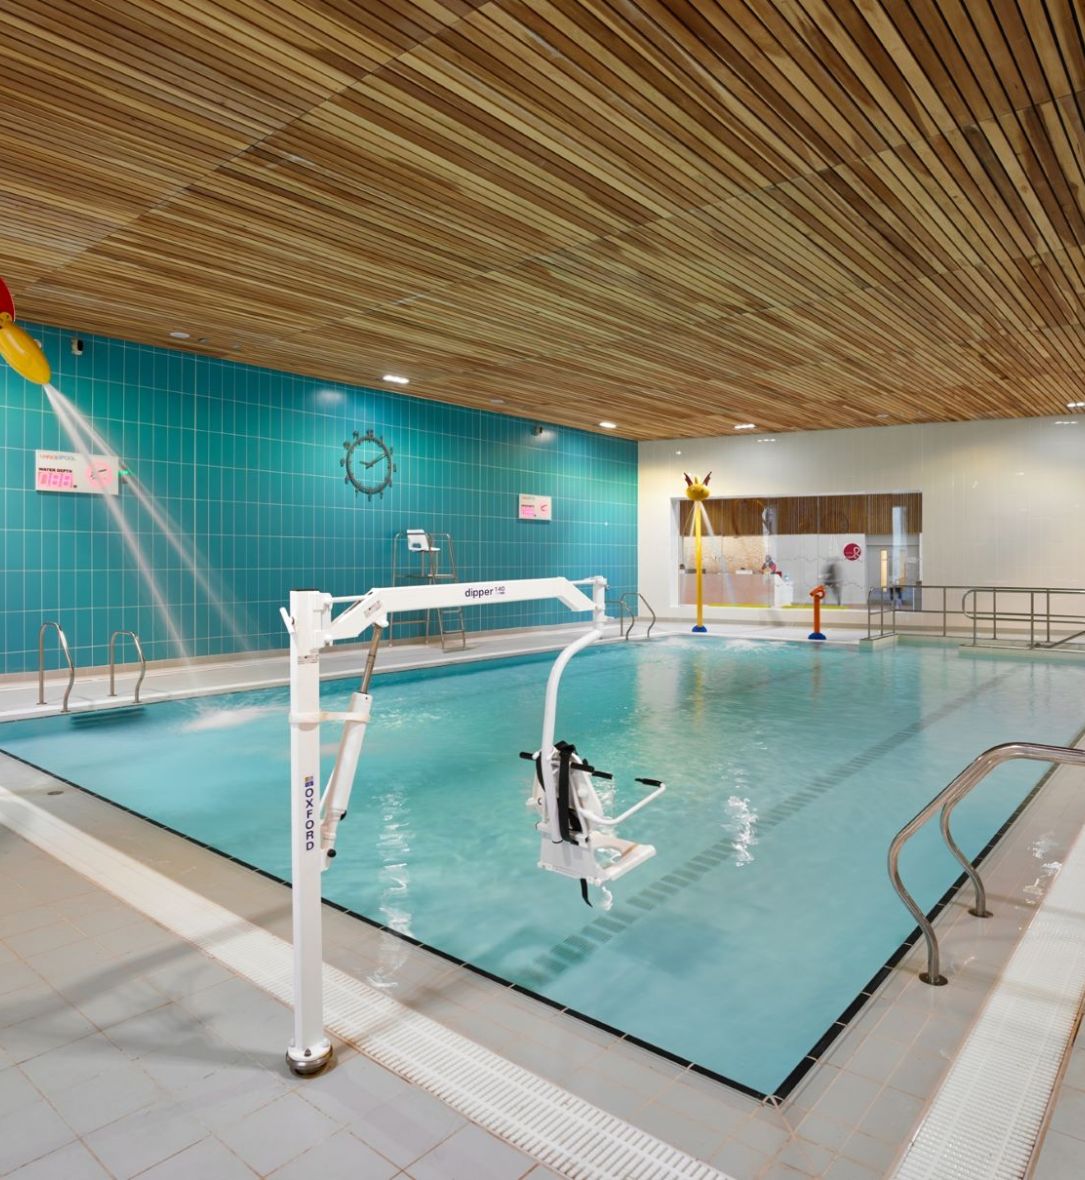 BCL Timber panels over the swimming pool at Irvine Leisure Centre